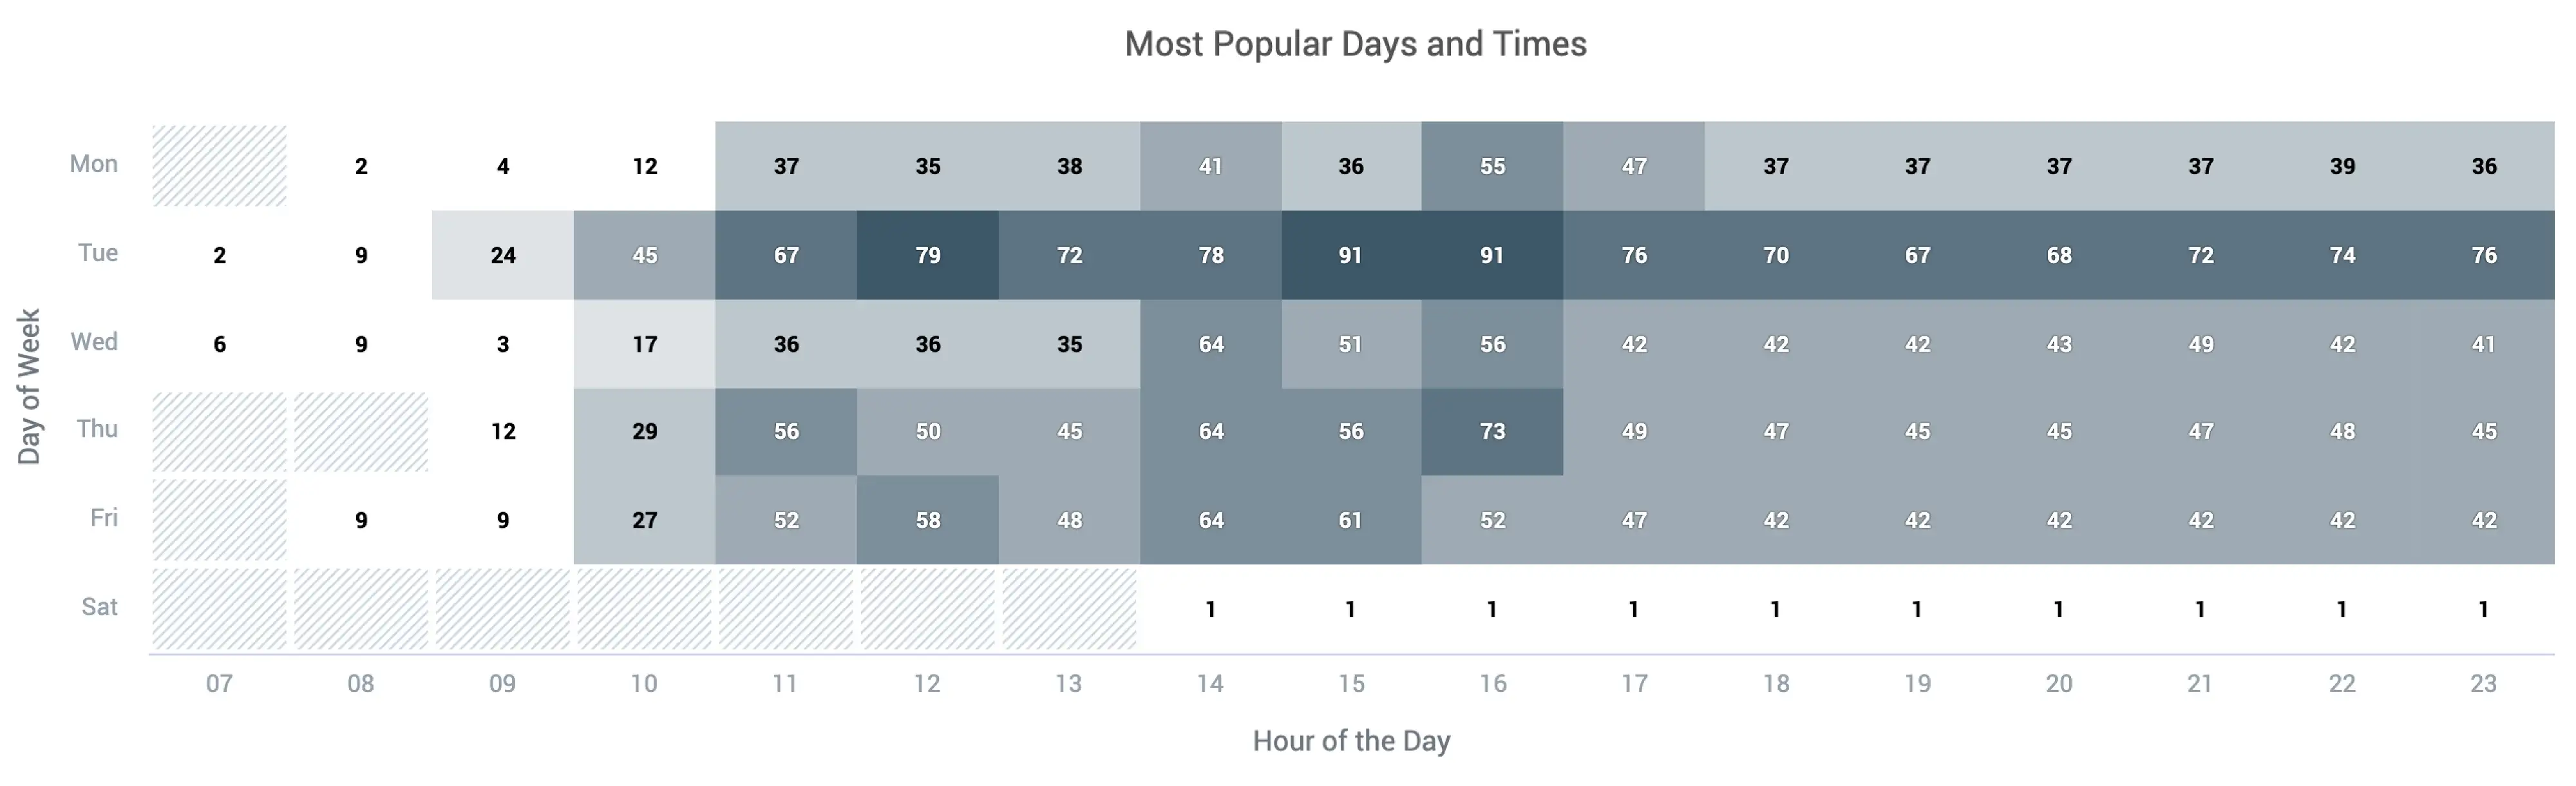 Heatmap showing the most popular days and times.